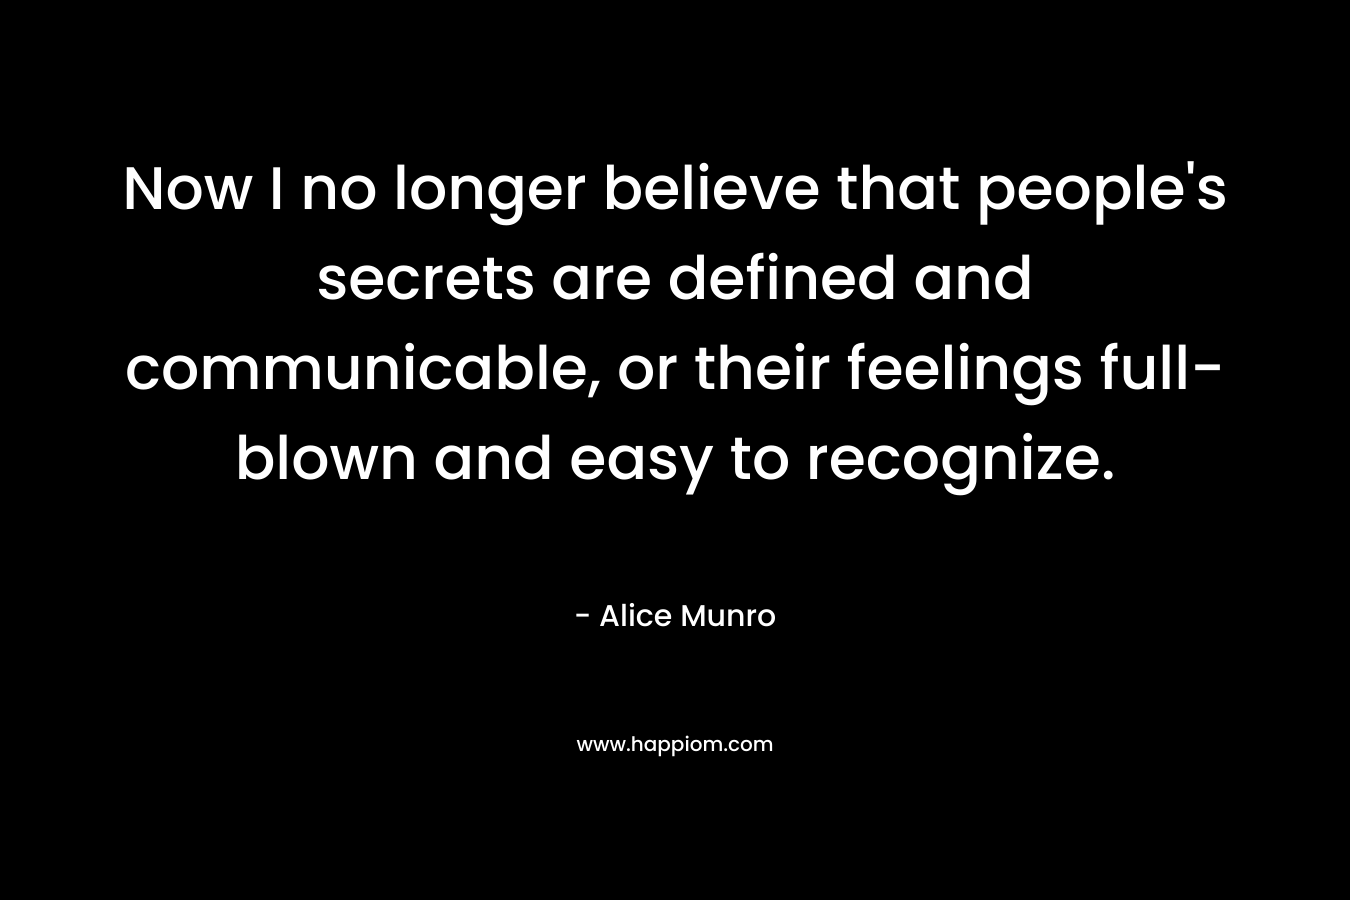 Now I no longer believe that people’s secrets are defined and communicable, or their feelings full-blown and easy to recognize. – Alice Munro